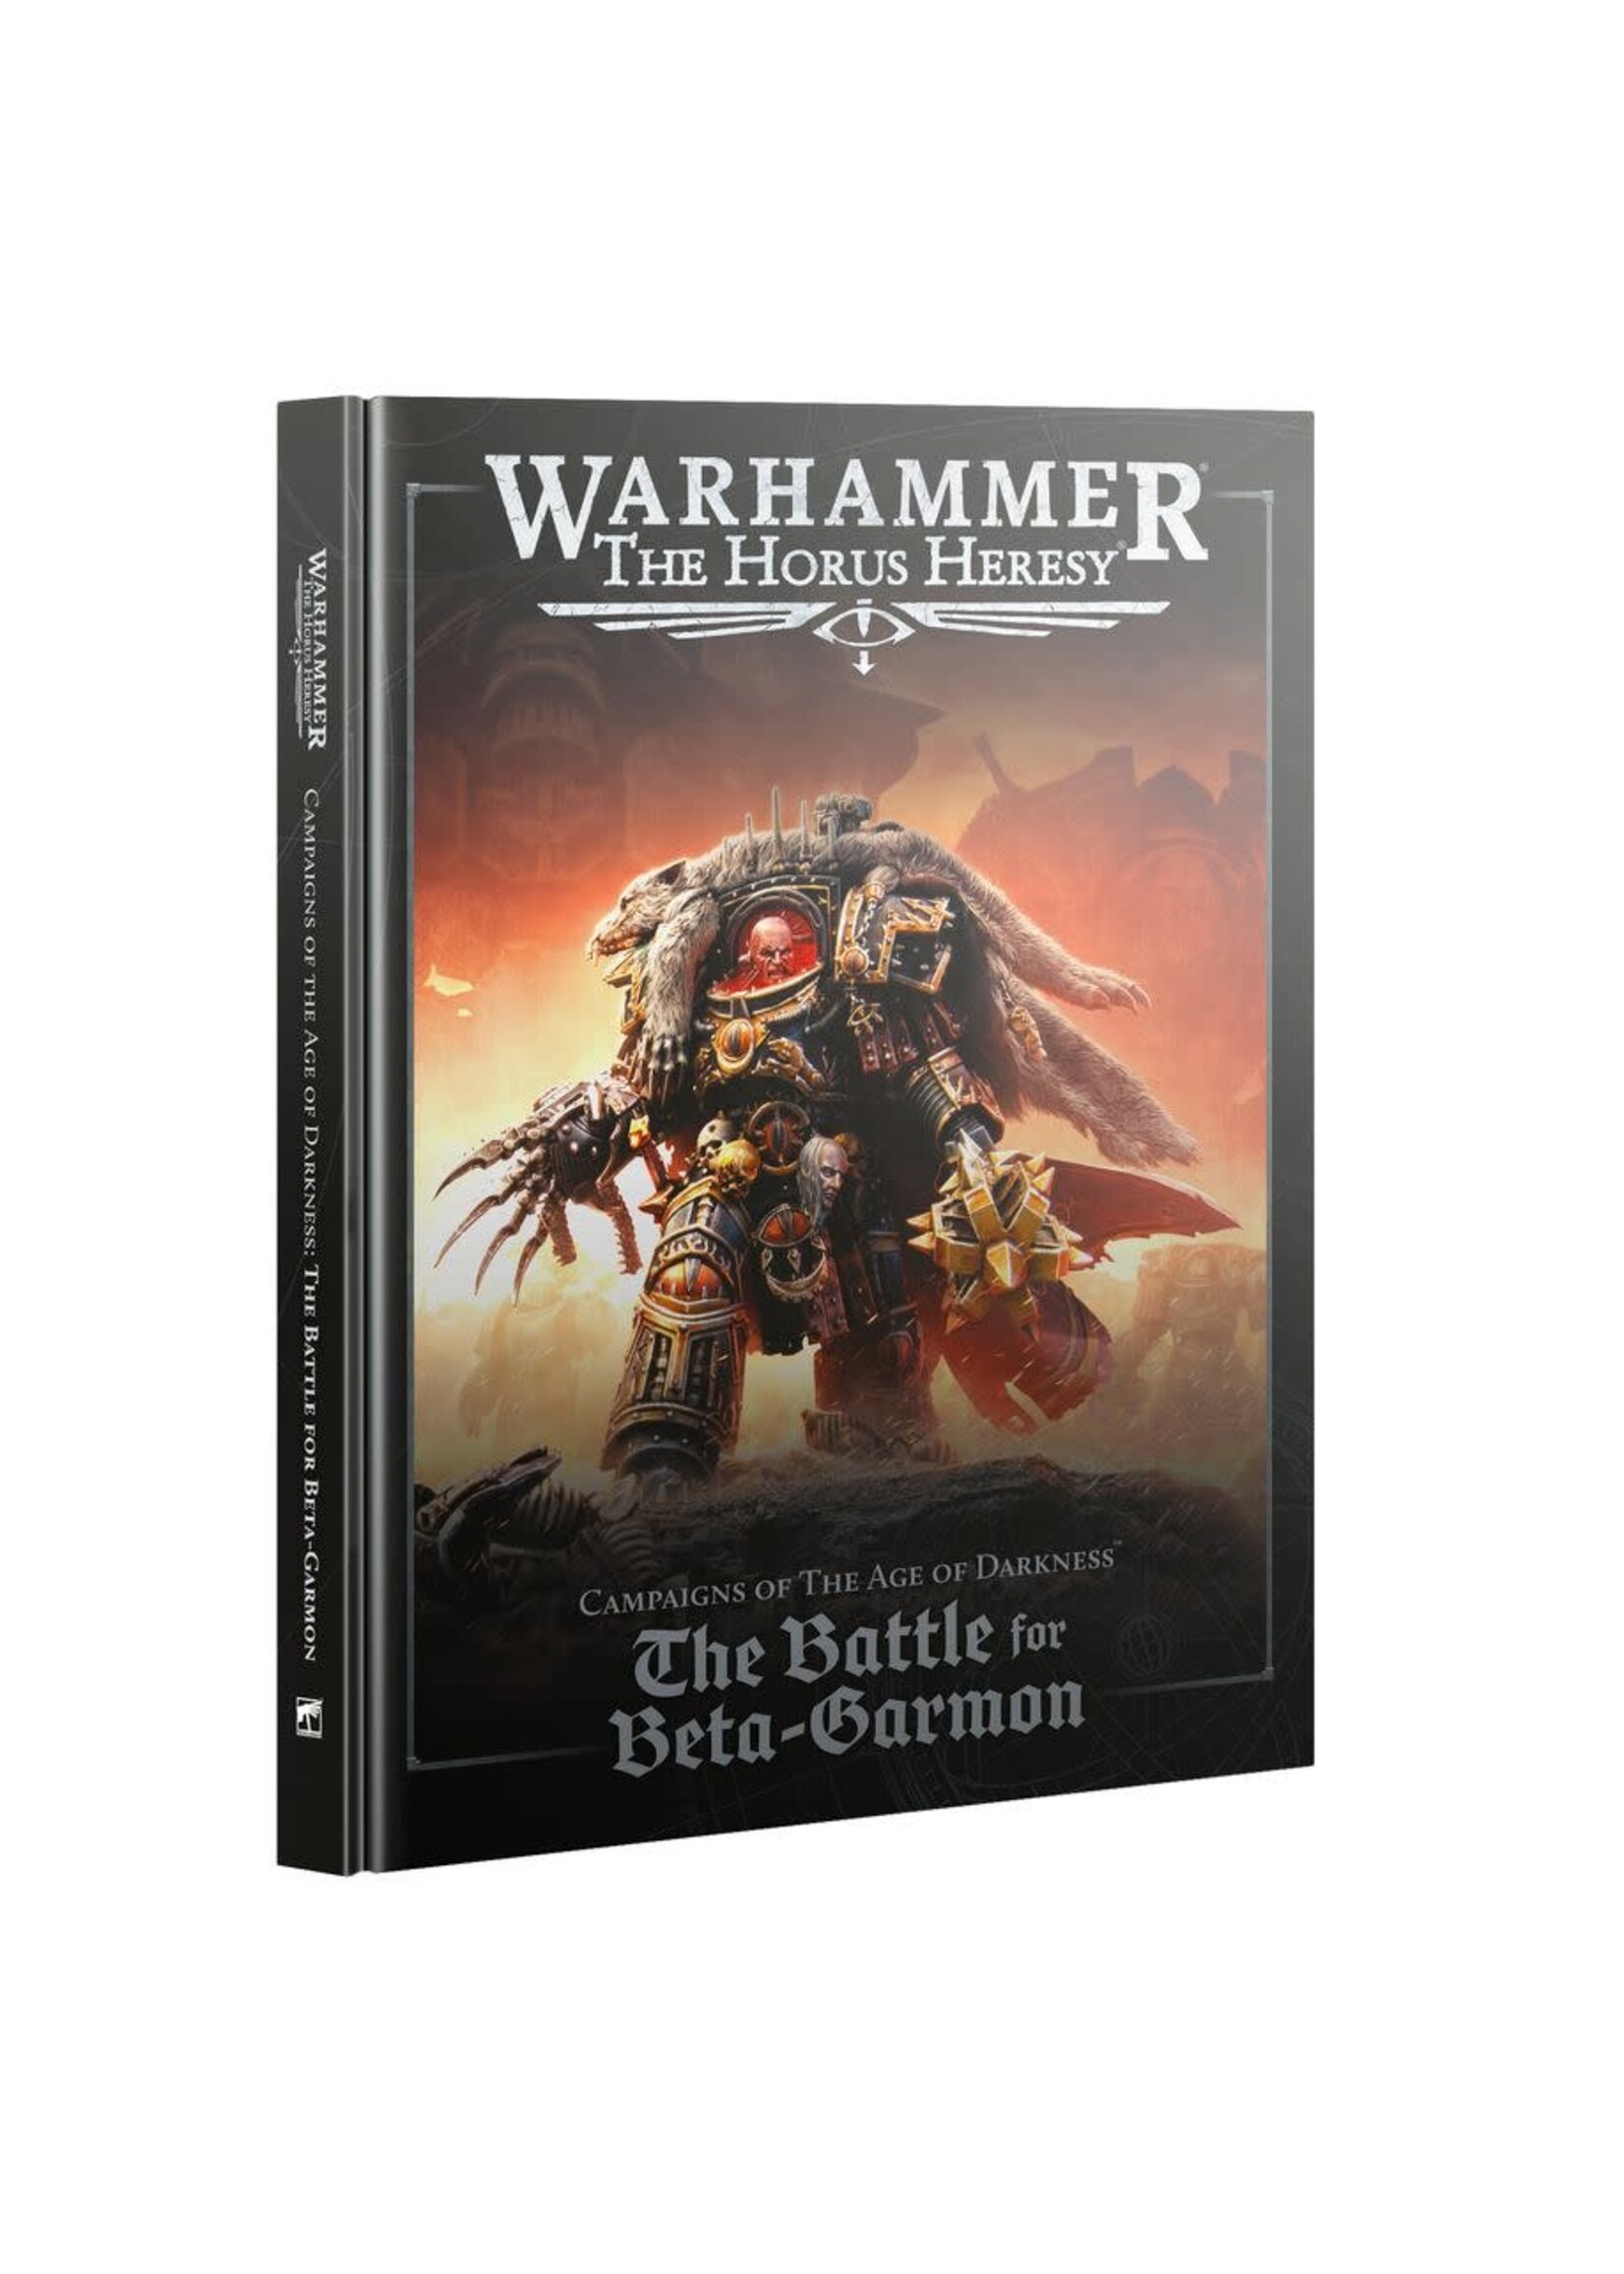 Games Workshop The Battle for Beta-Garmon Campaign Book